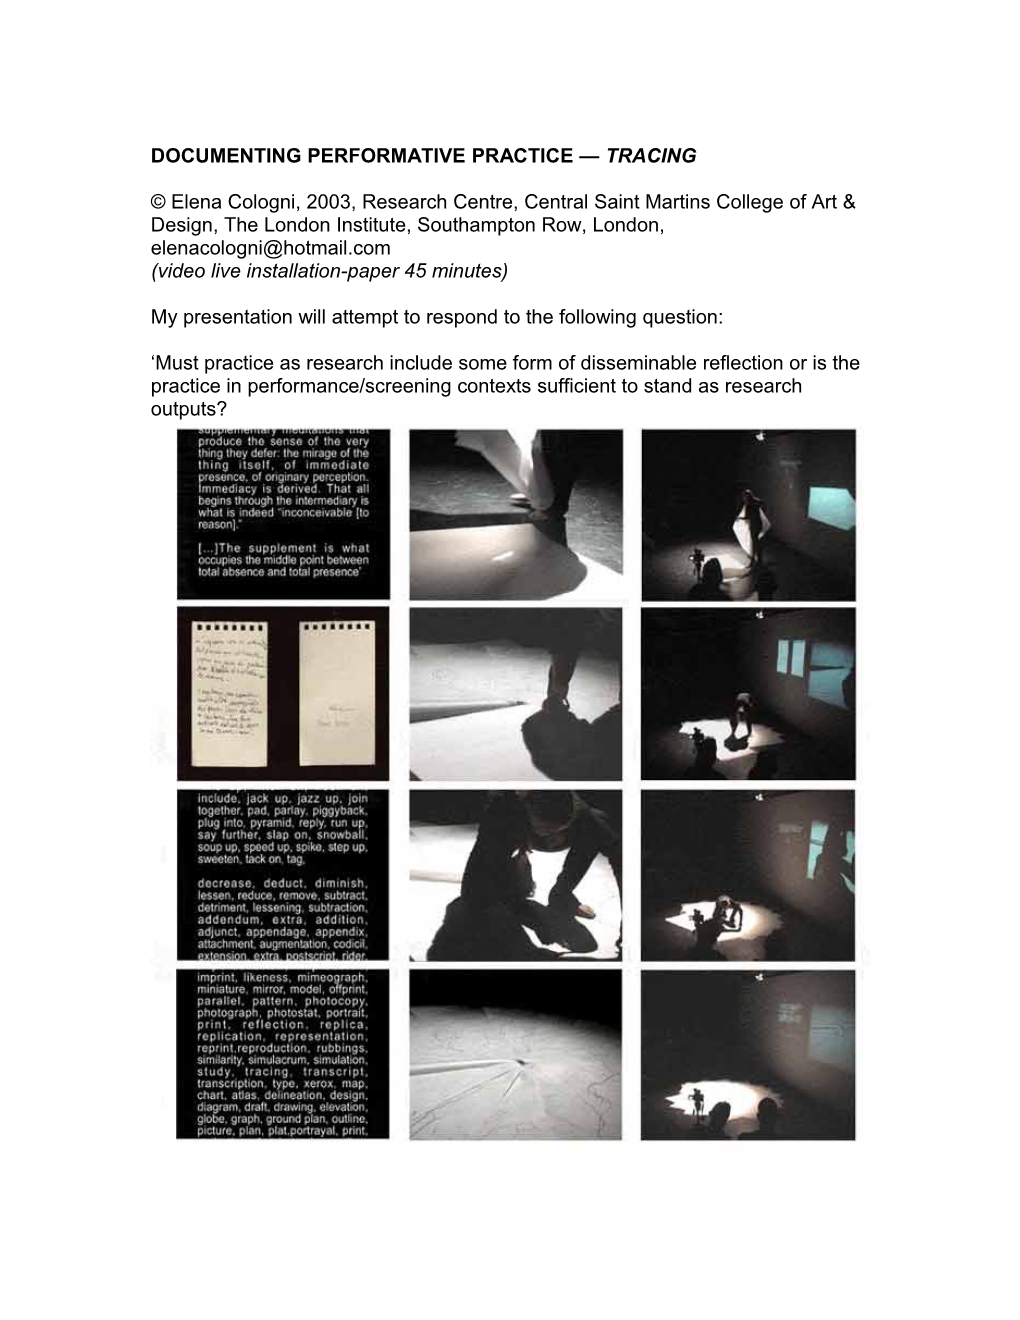 Documenting Performative Practice Tracing